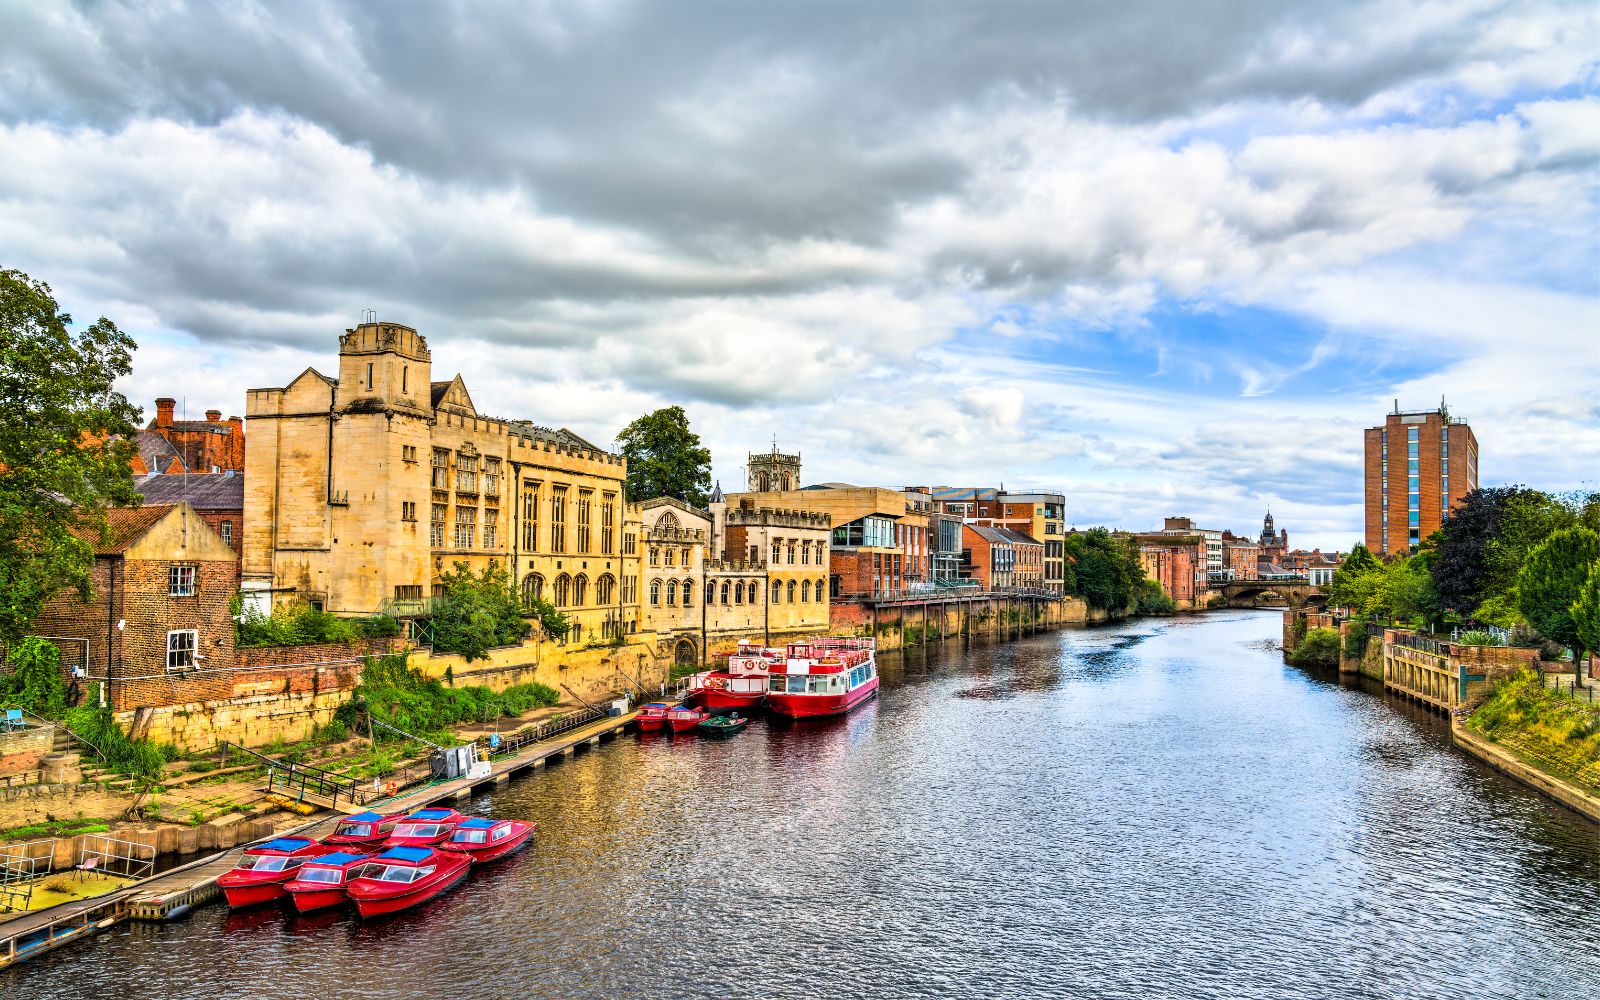 Where to Stay in York: Best Areas and Accommodation